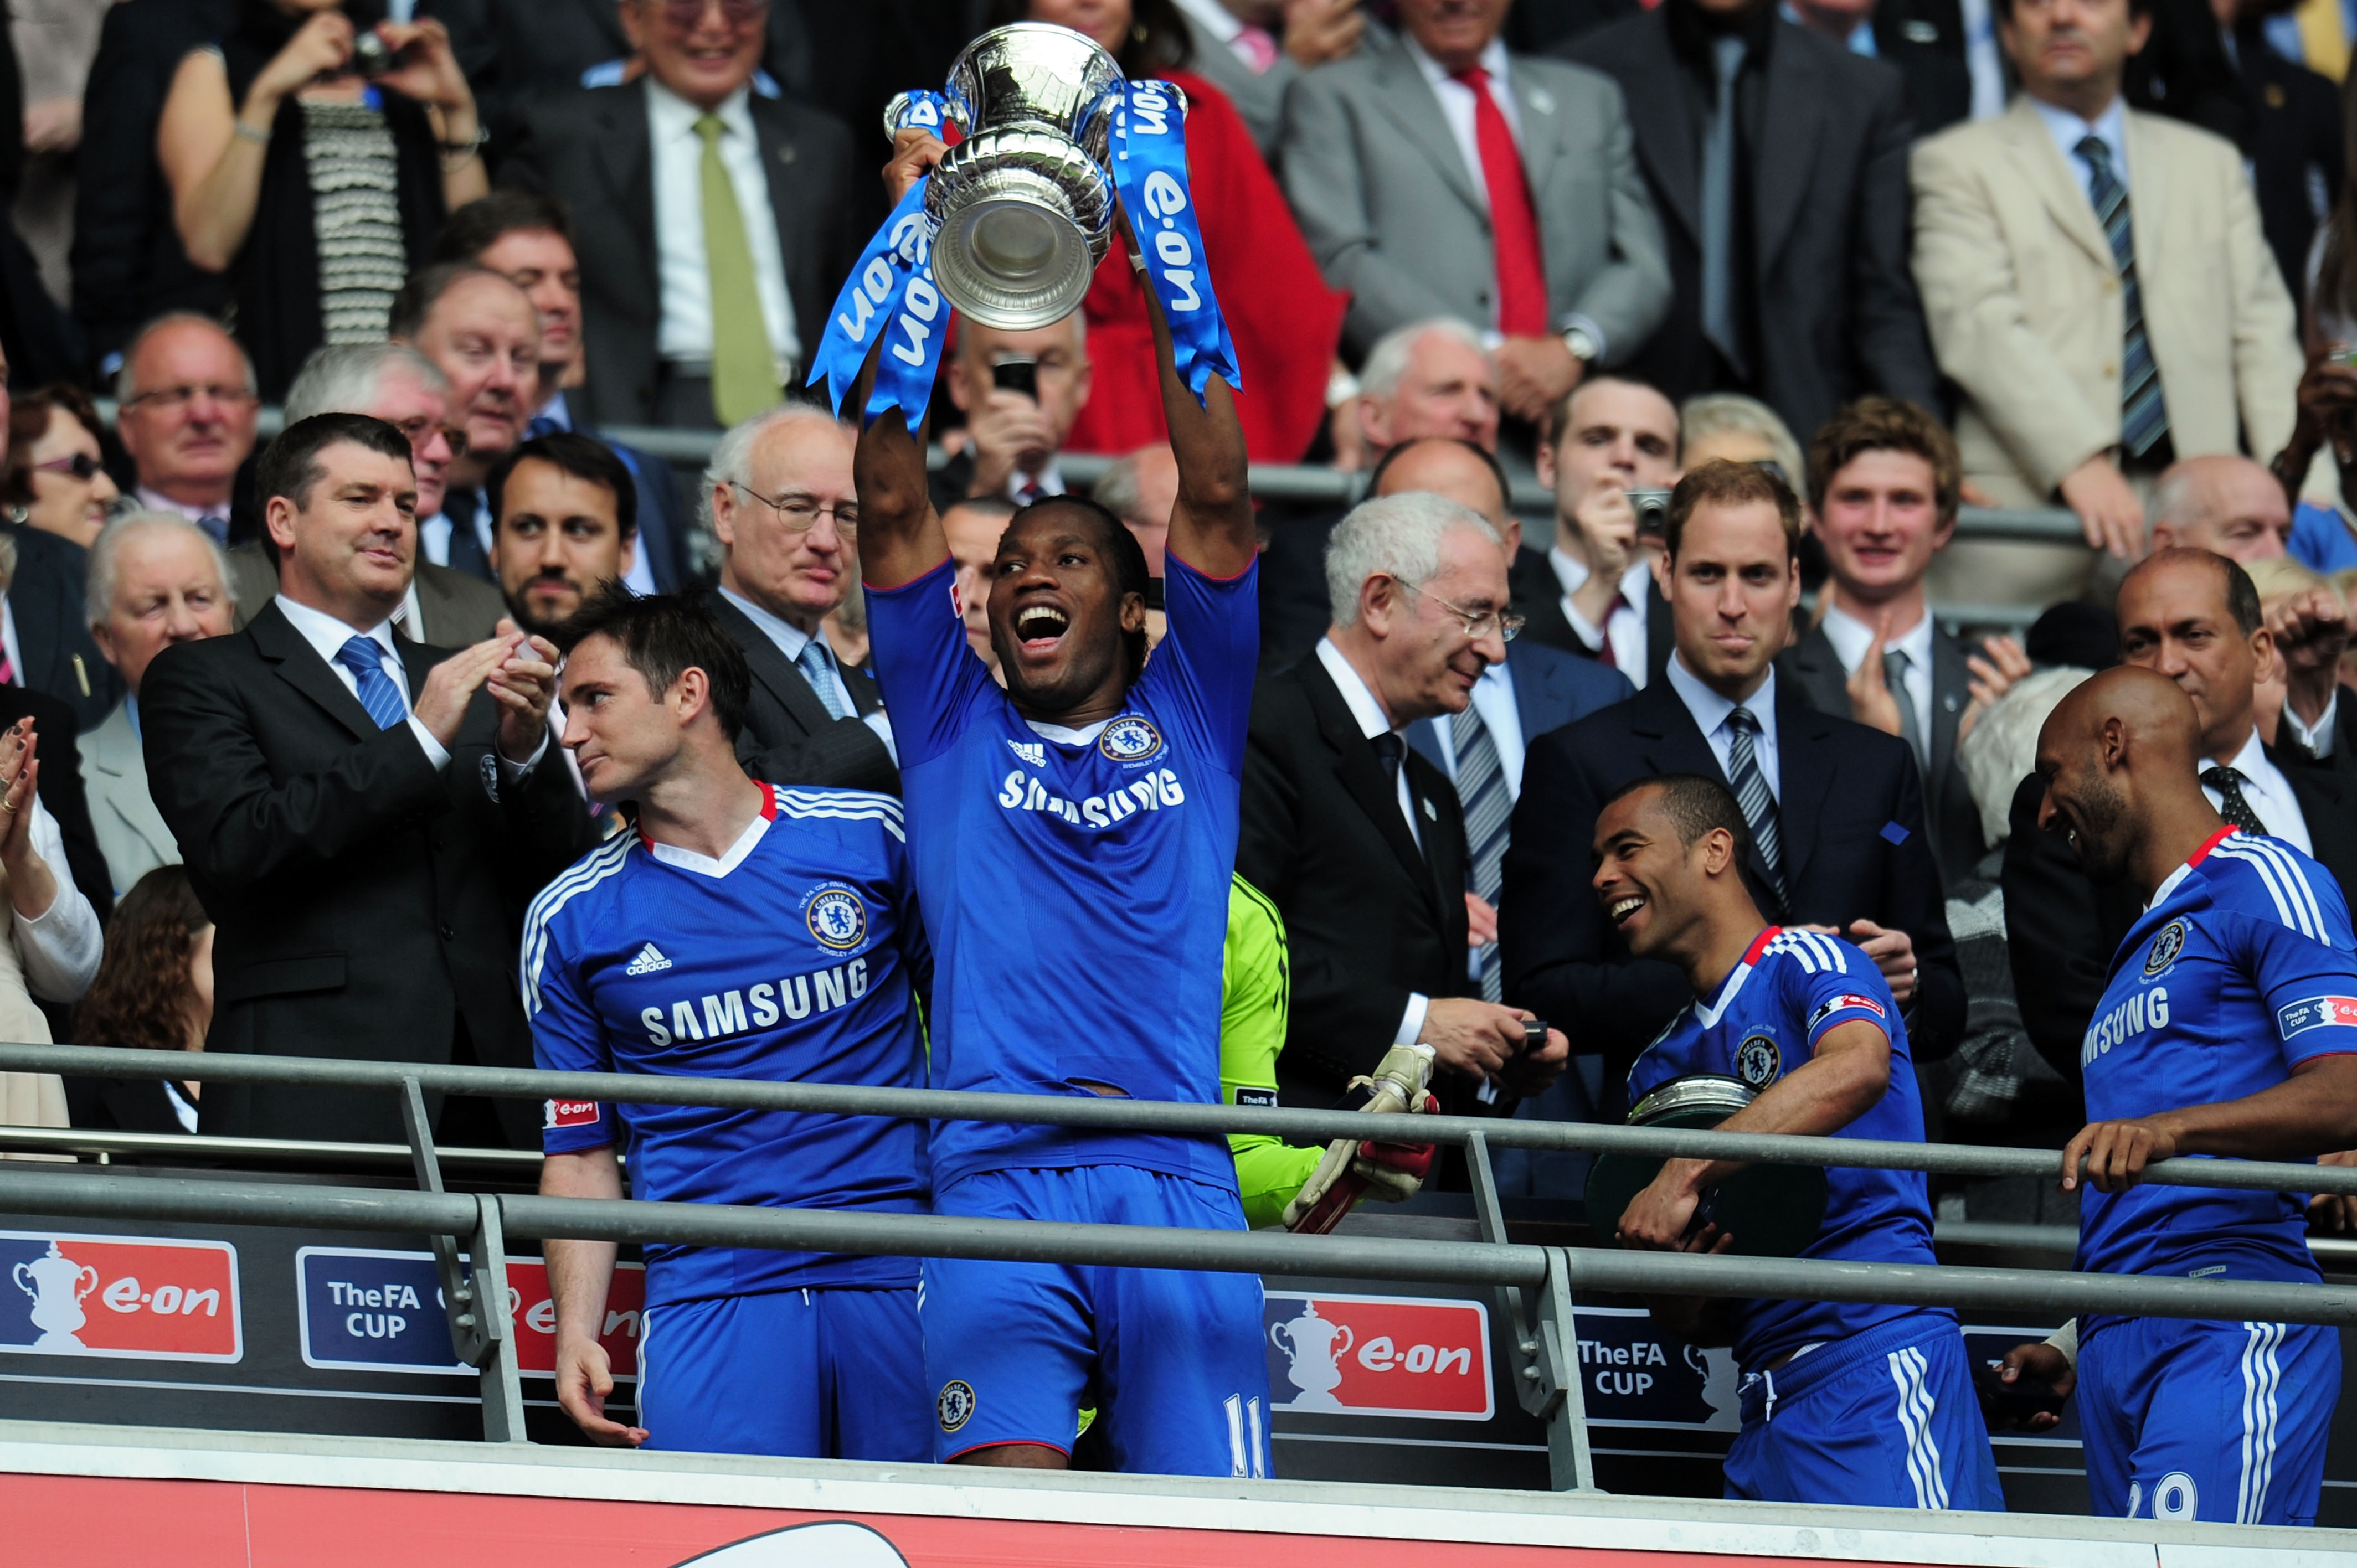 LONDON, ENGLAND - MAY 15:  Didier Drogba of Chelsea celebrate winning the FA Cup sponsored by E.ON Final match between Chelsea and Portsmouth at Wembley Stadium on May 15, 2010 in London, England.  (Photo by Shaun Botterill/Getty Images)